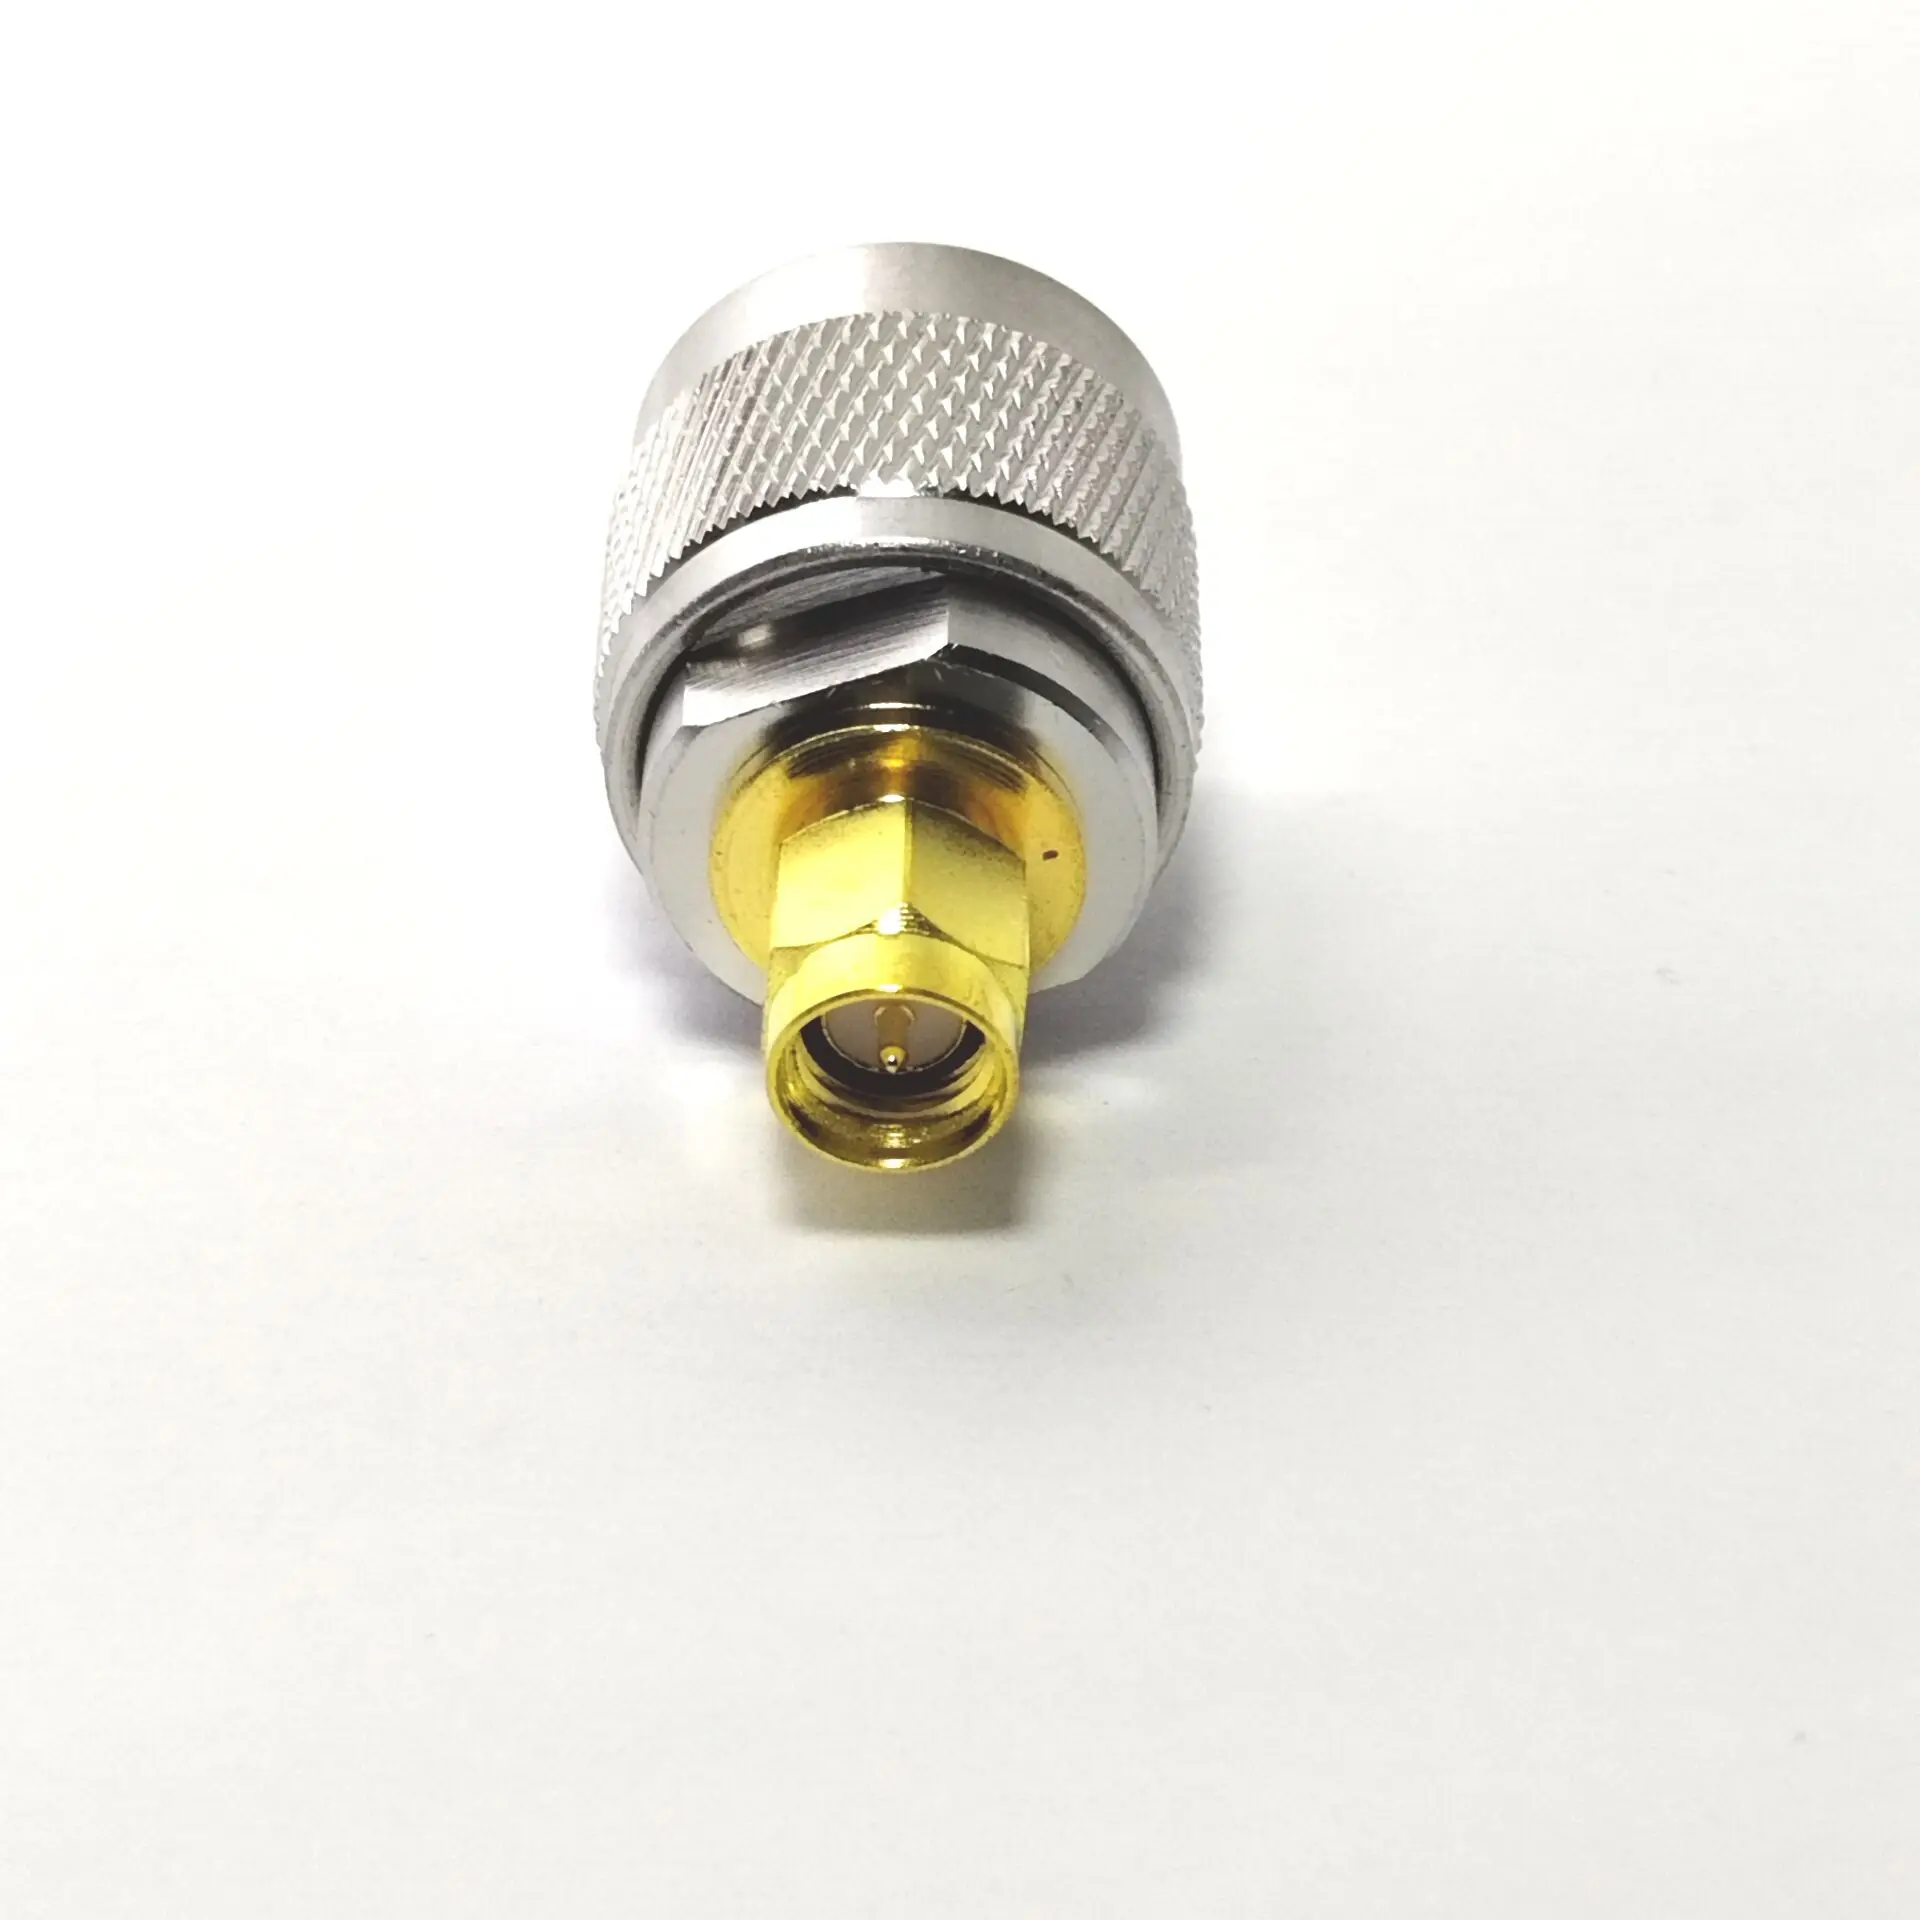 Low price  Adapter n male plug to sma male straight  rf coaxial connector adaptor details